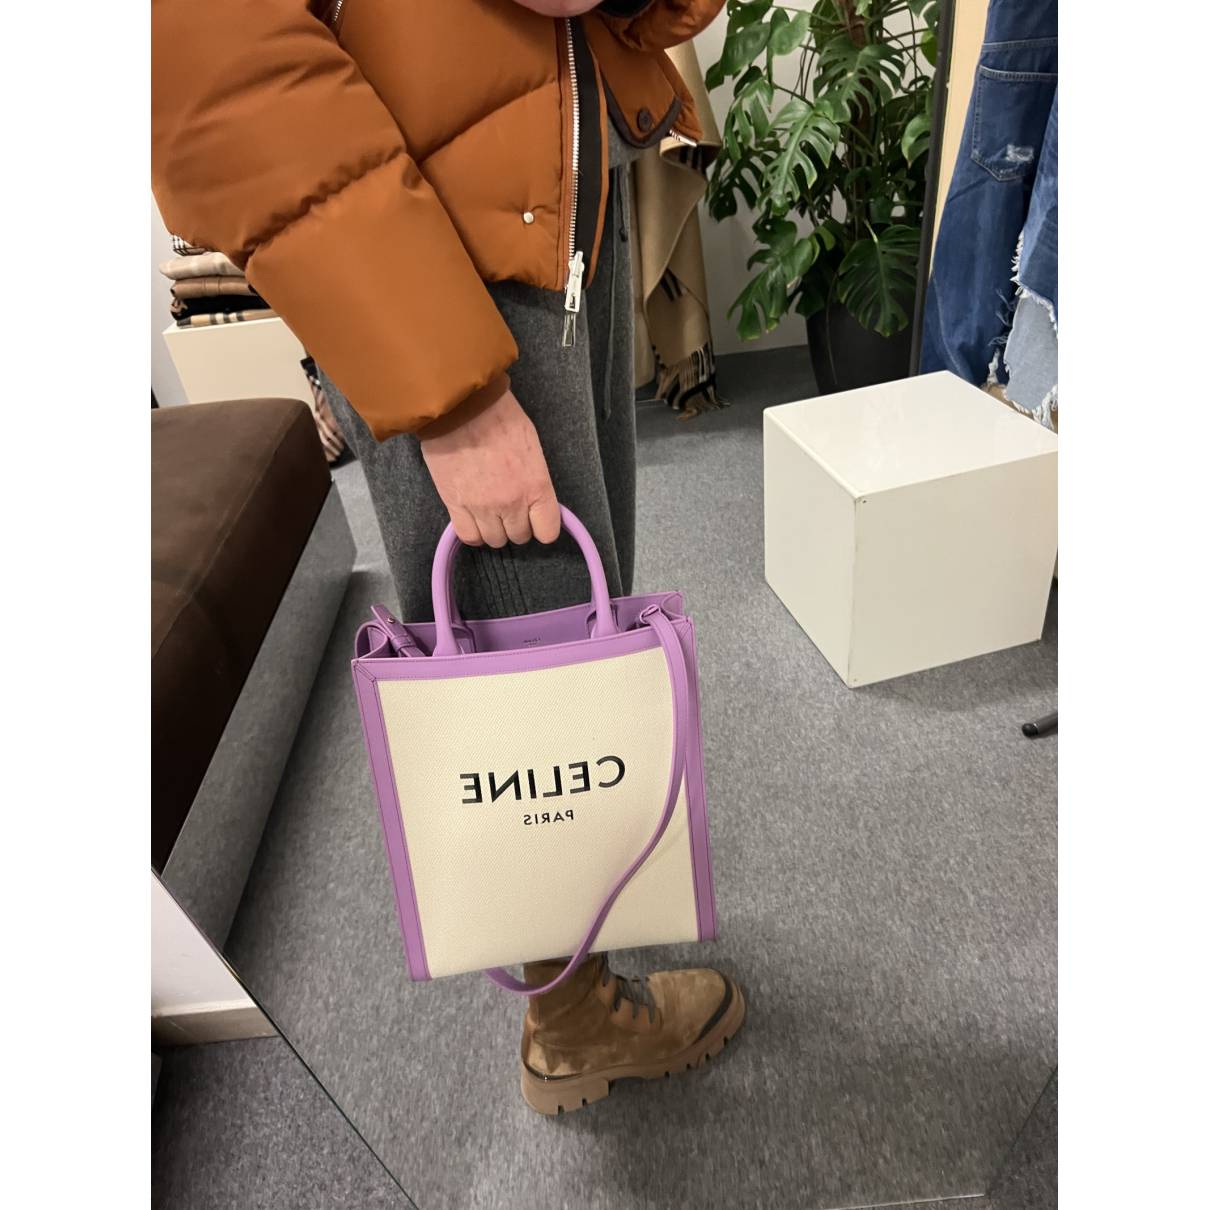 Celine Small Vertical Cabas Tote availability and review?